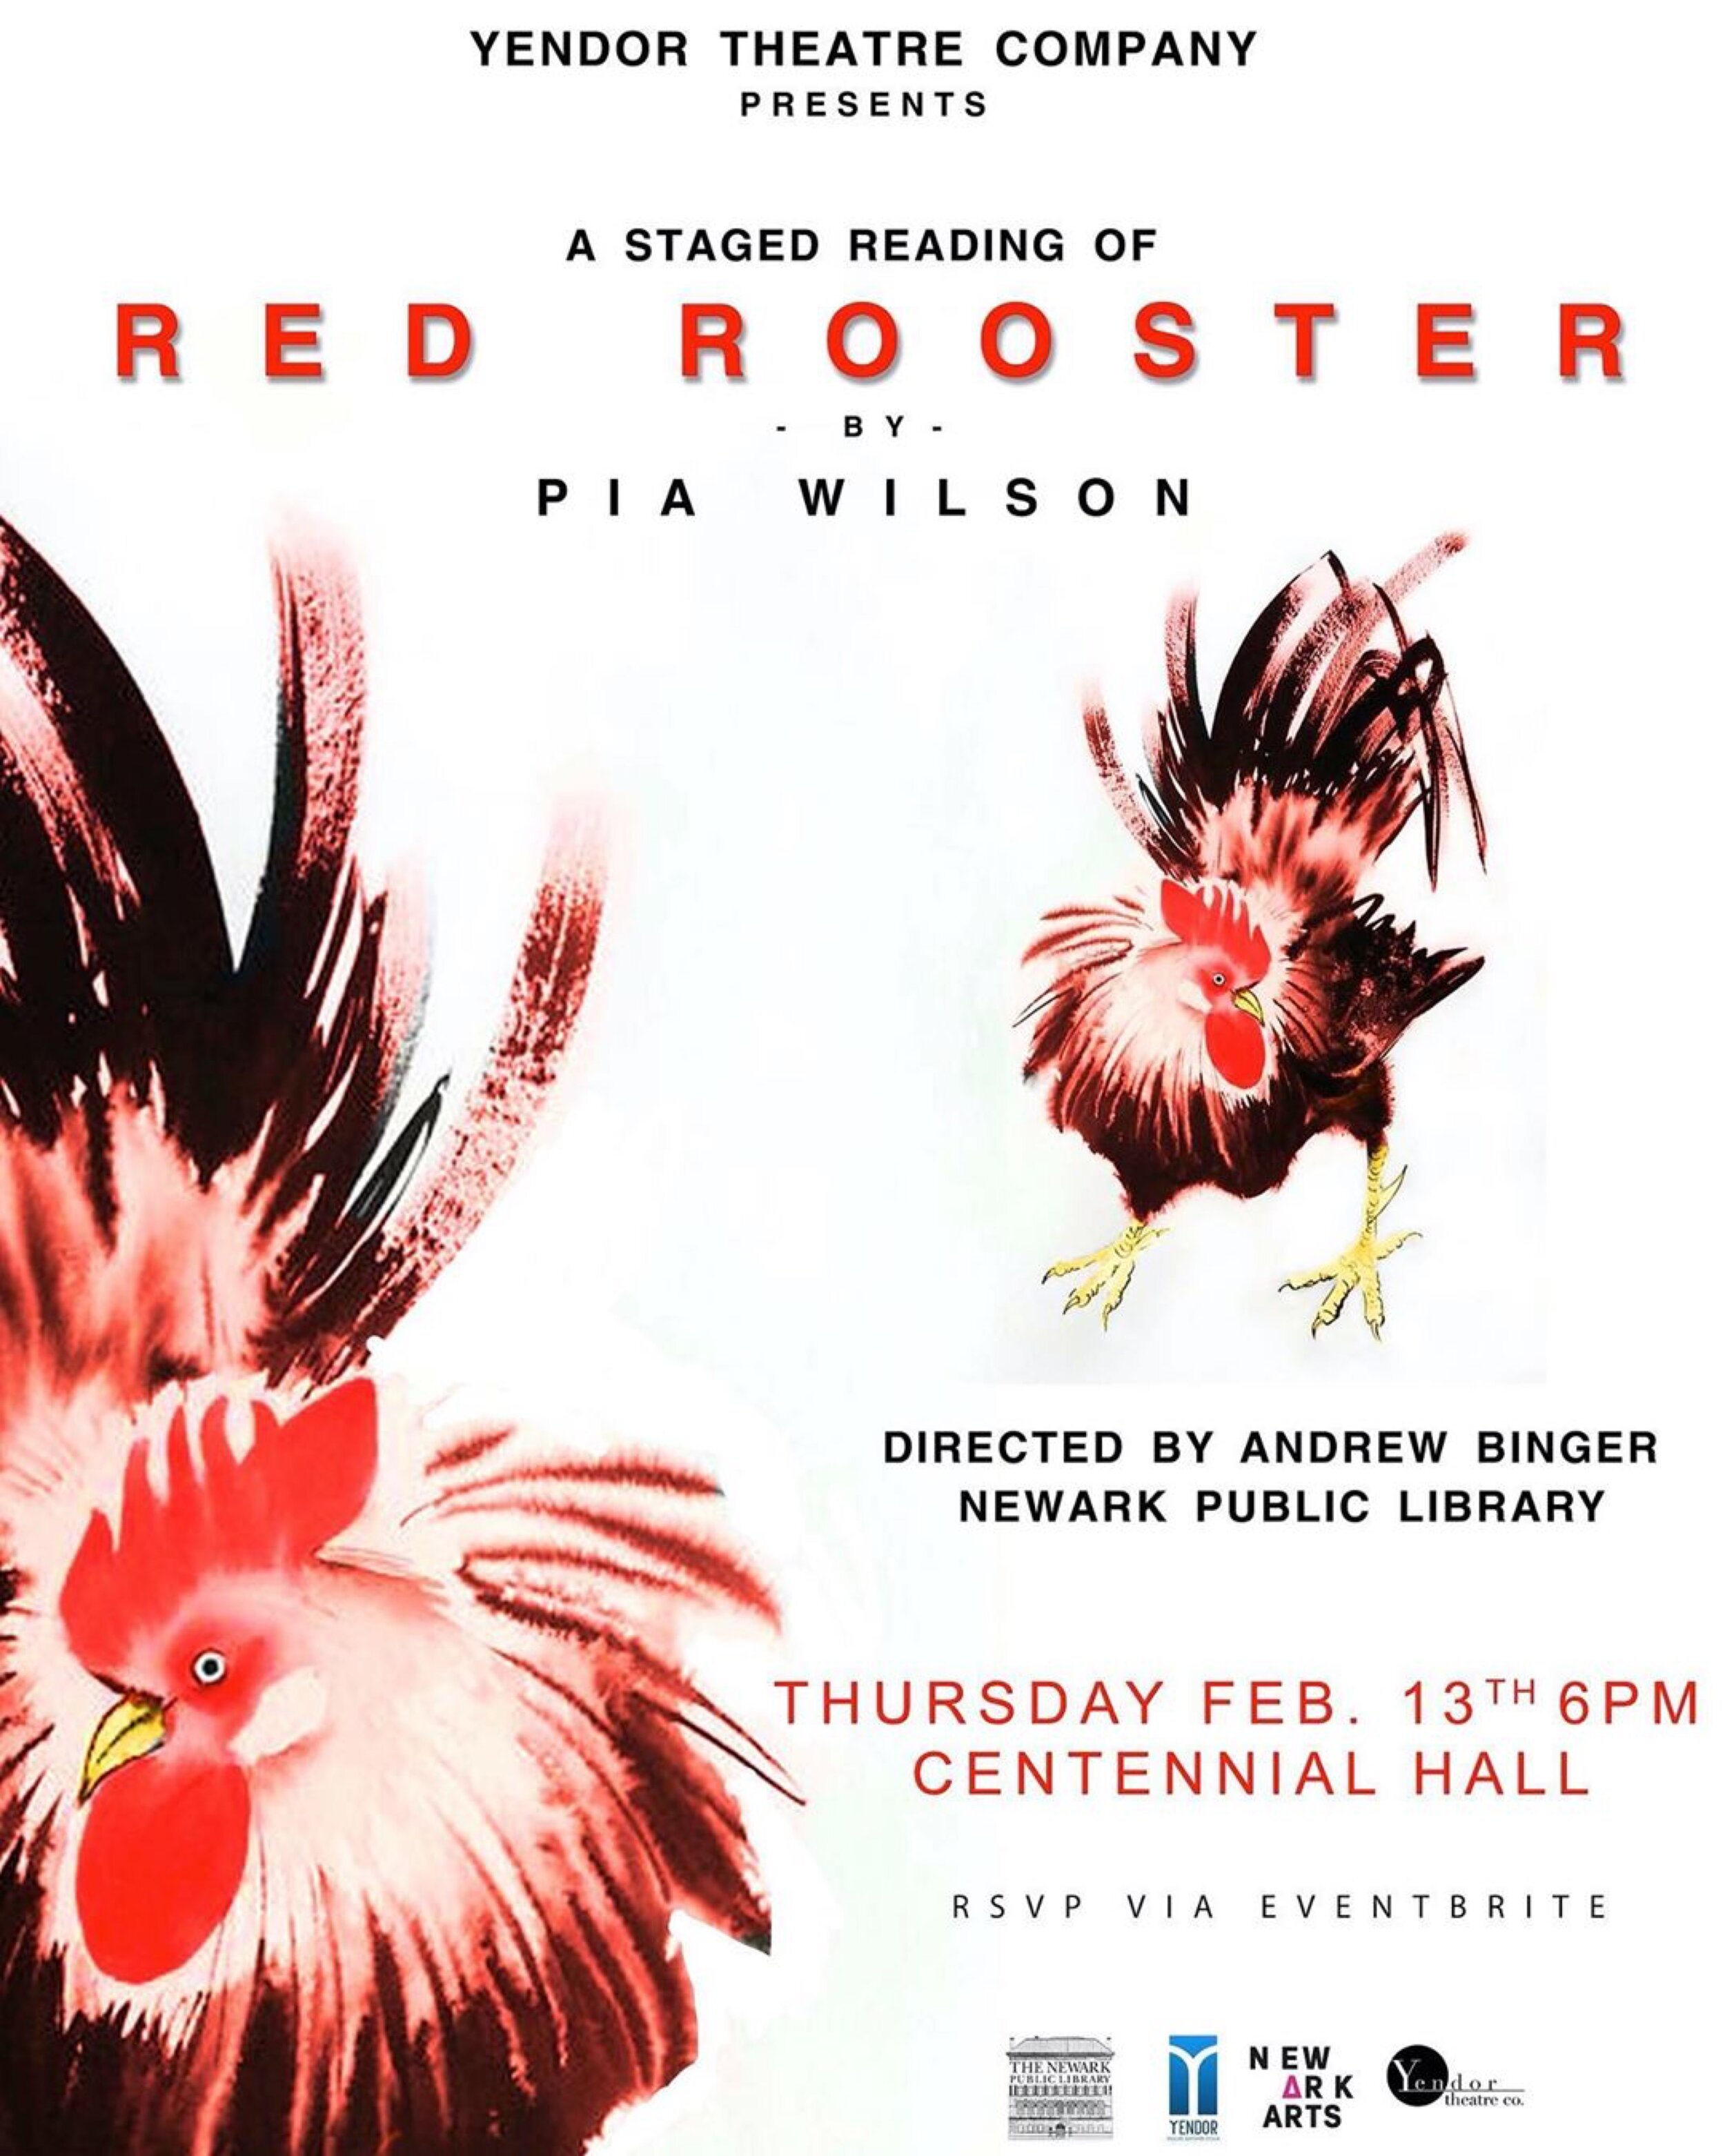 Red Rooster flyer.JPG